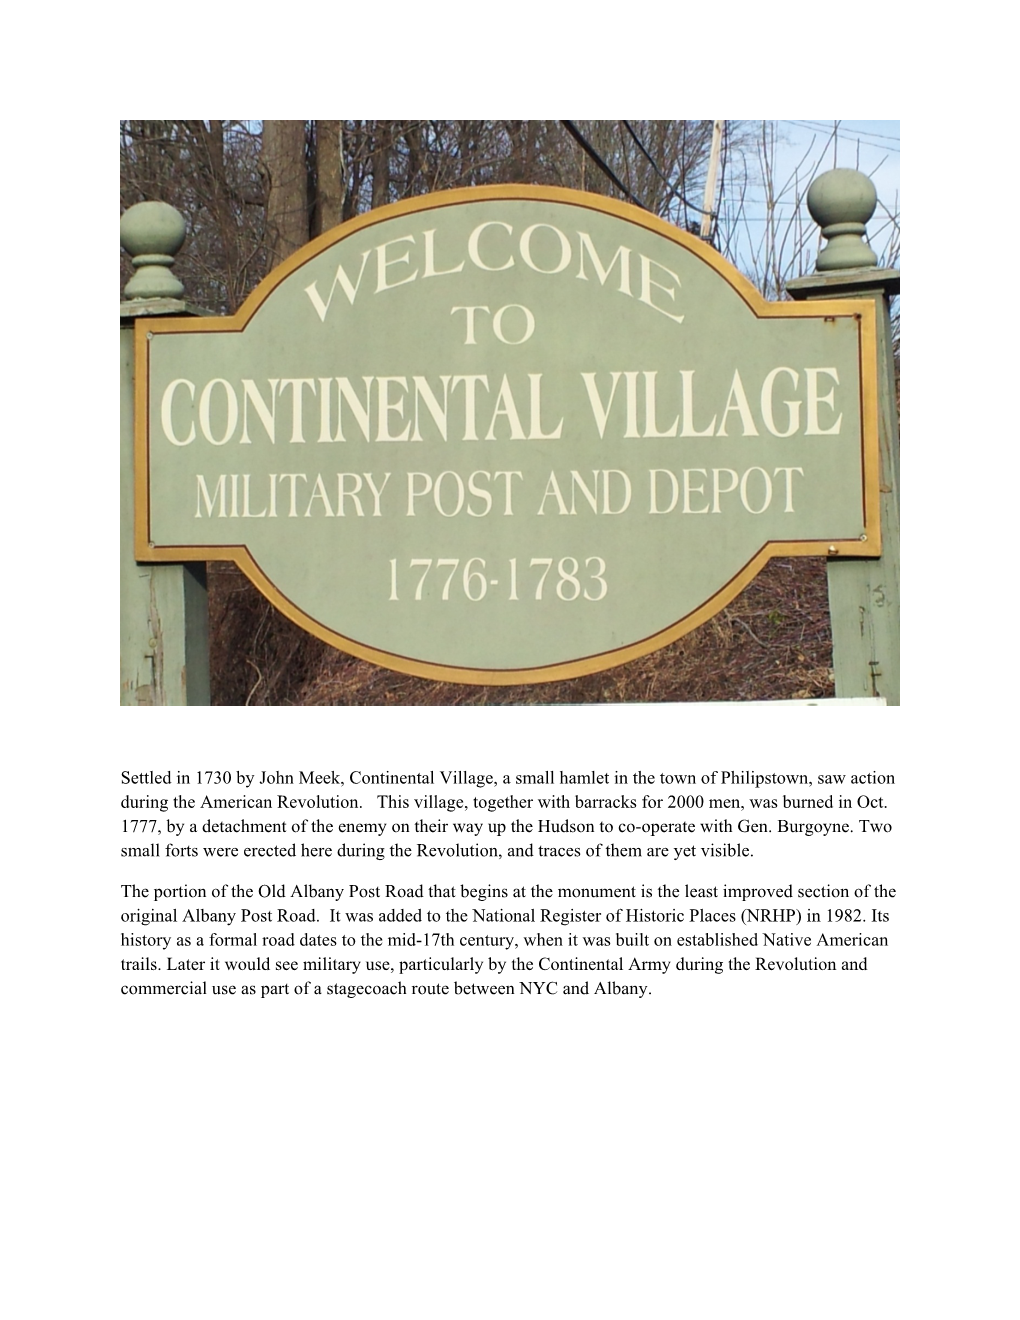 History of Continental Village